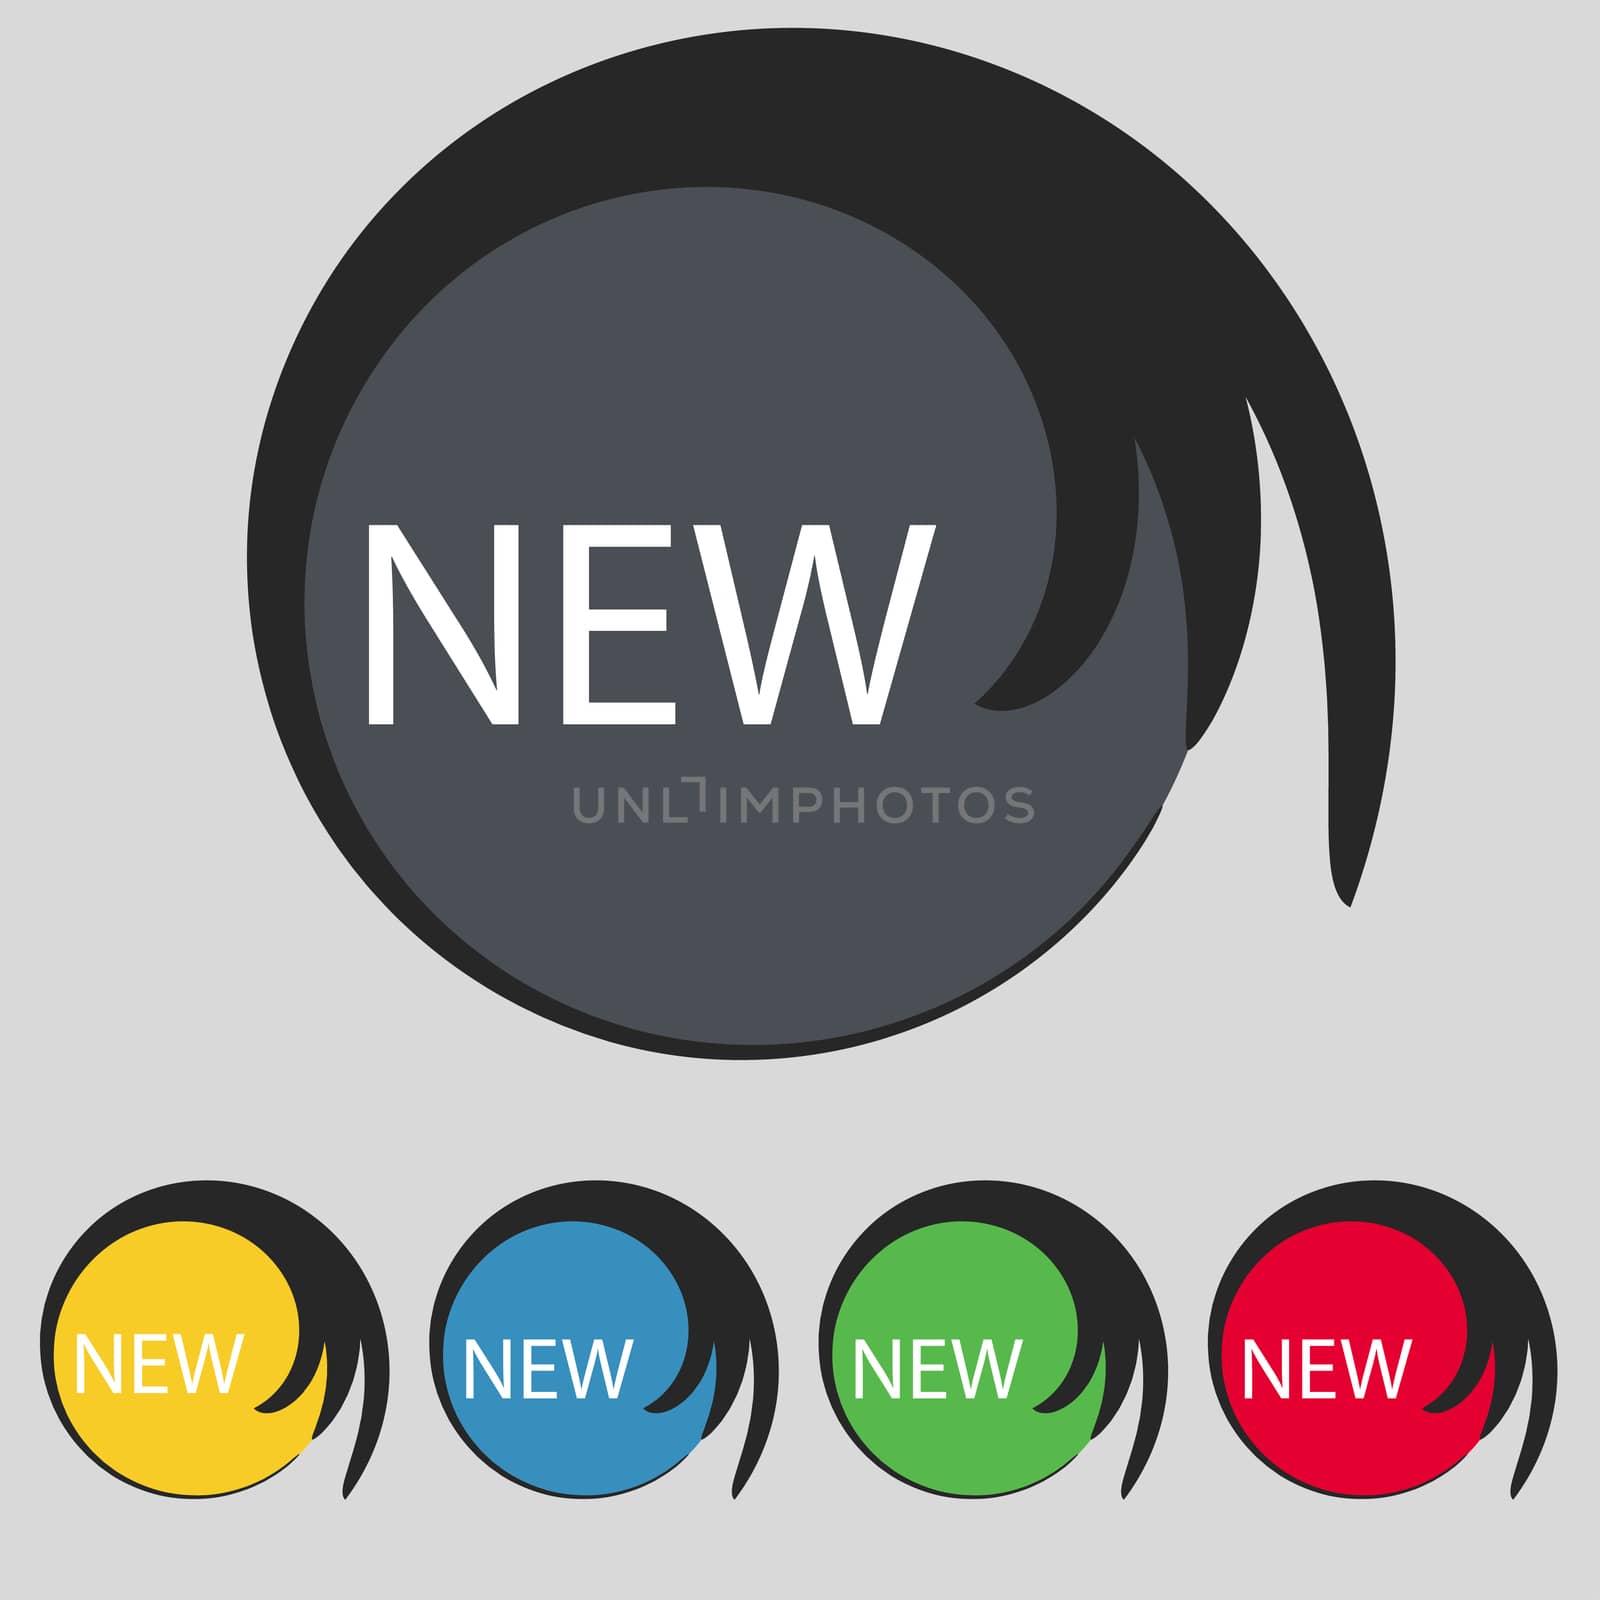 New sign icon. arrival button symbol. Set of colored buttons. illustration